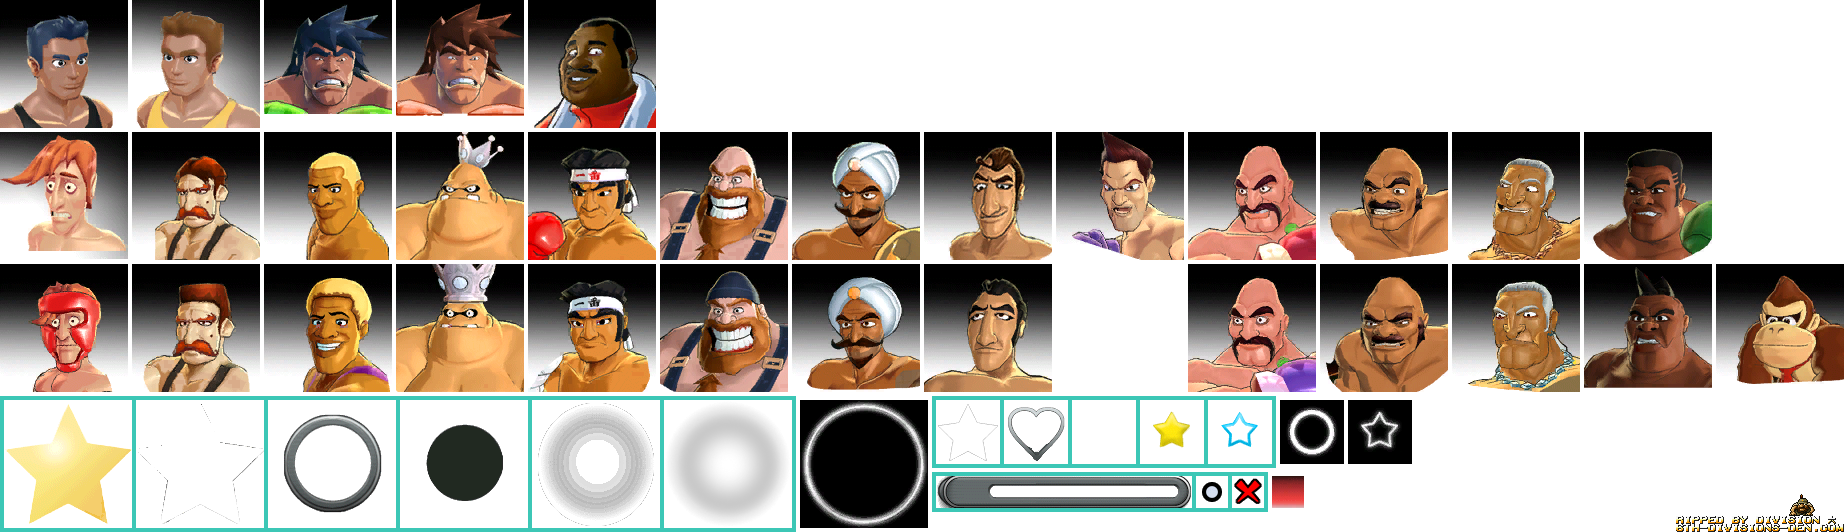 Punch-Out!! - Character Status